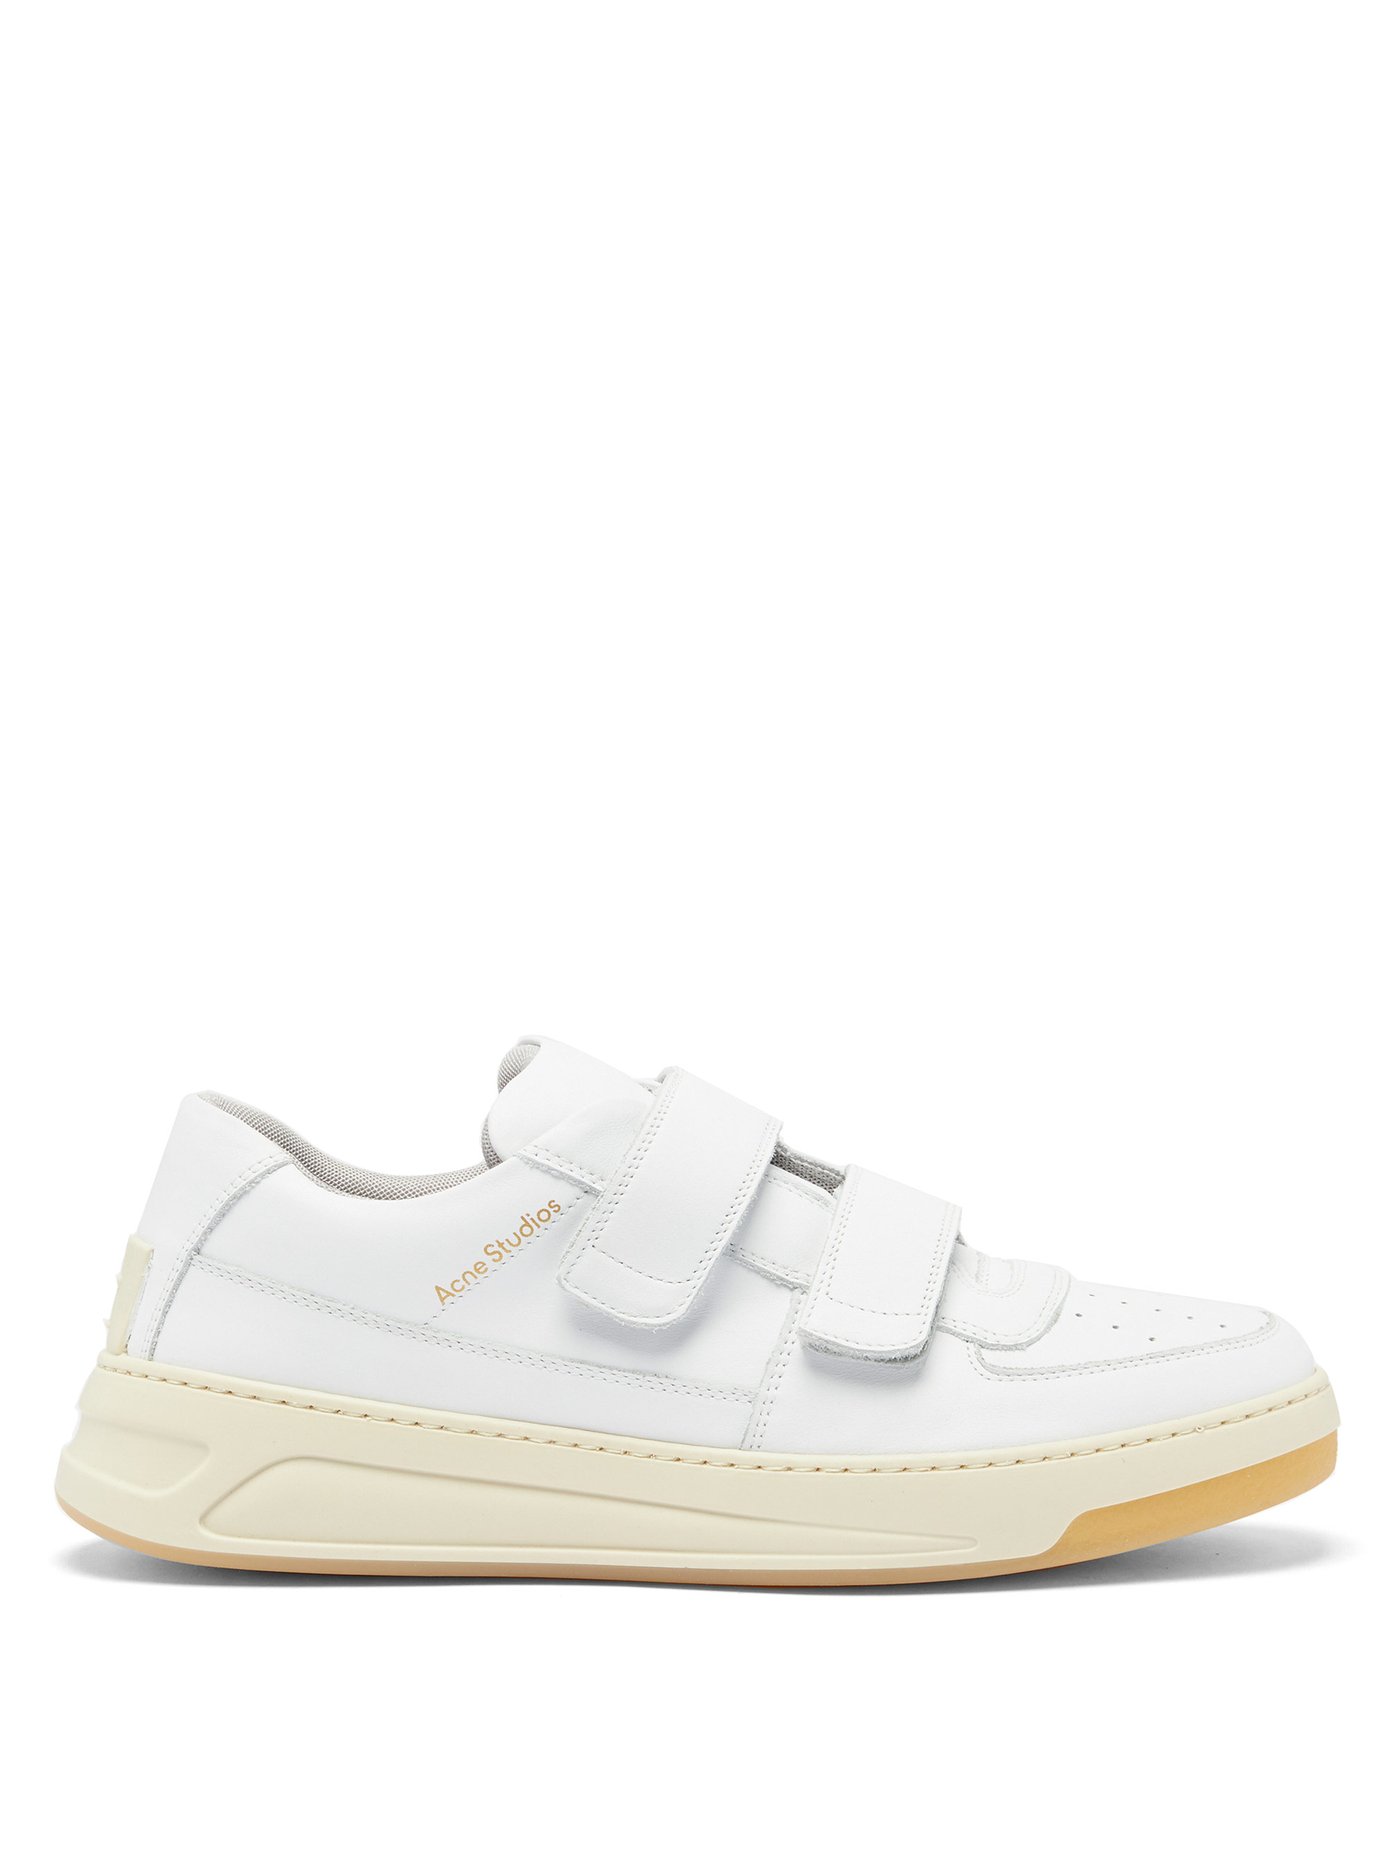 Perey face-logo leather trainers | Acne 